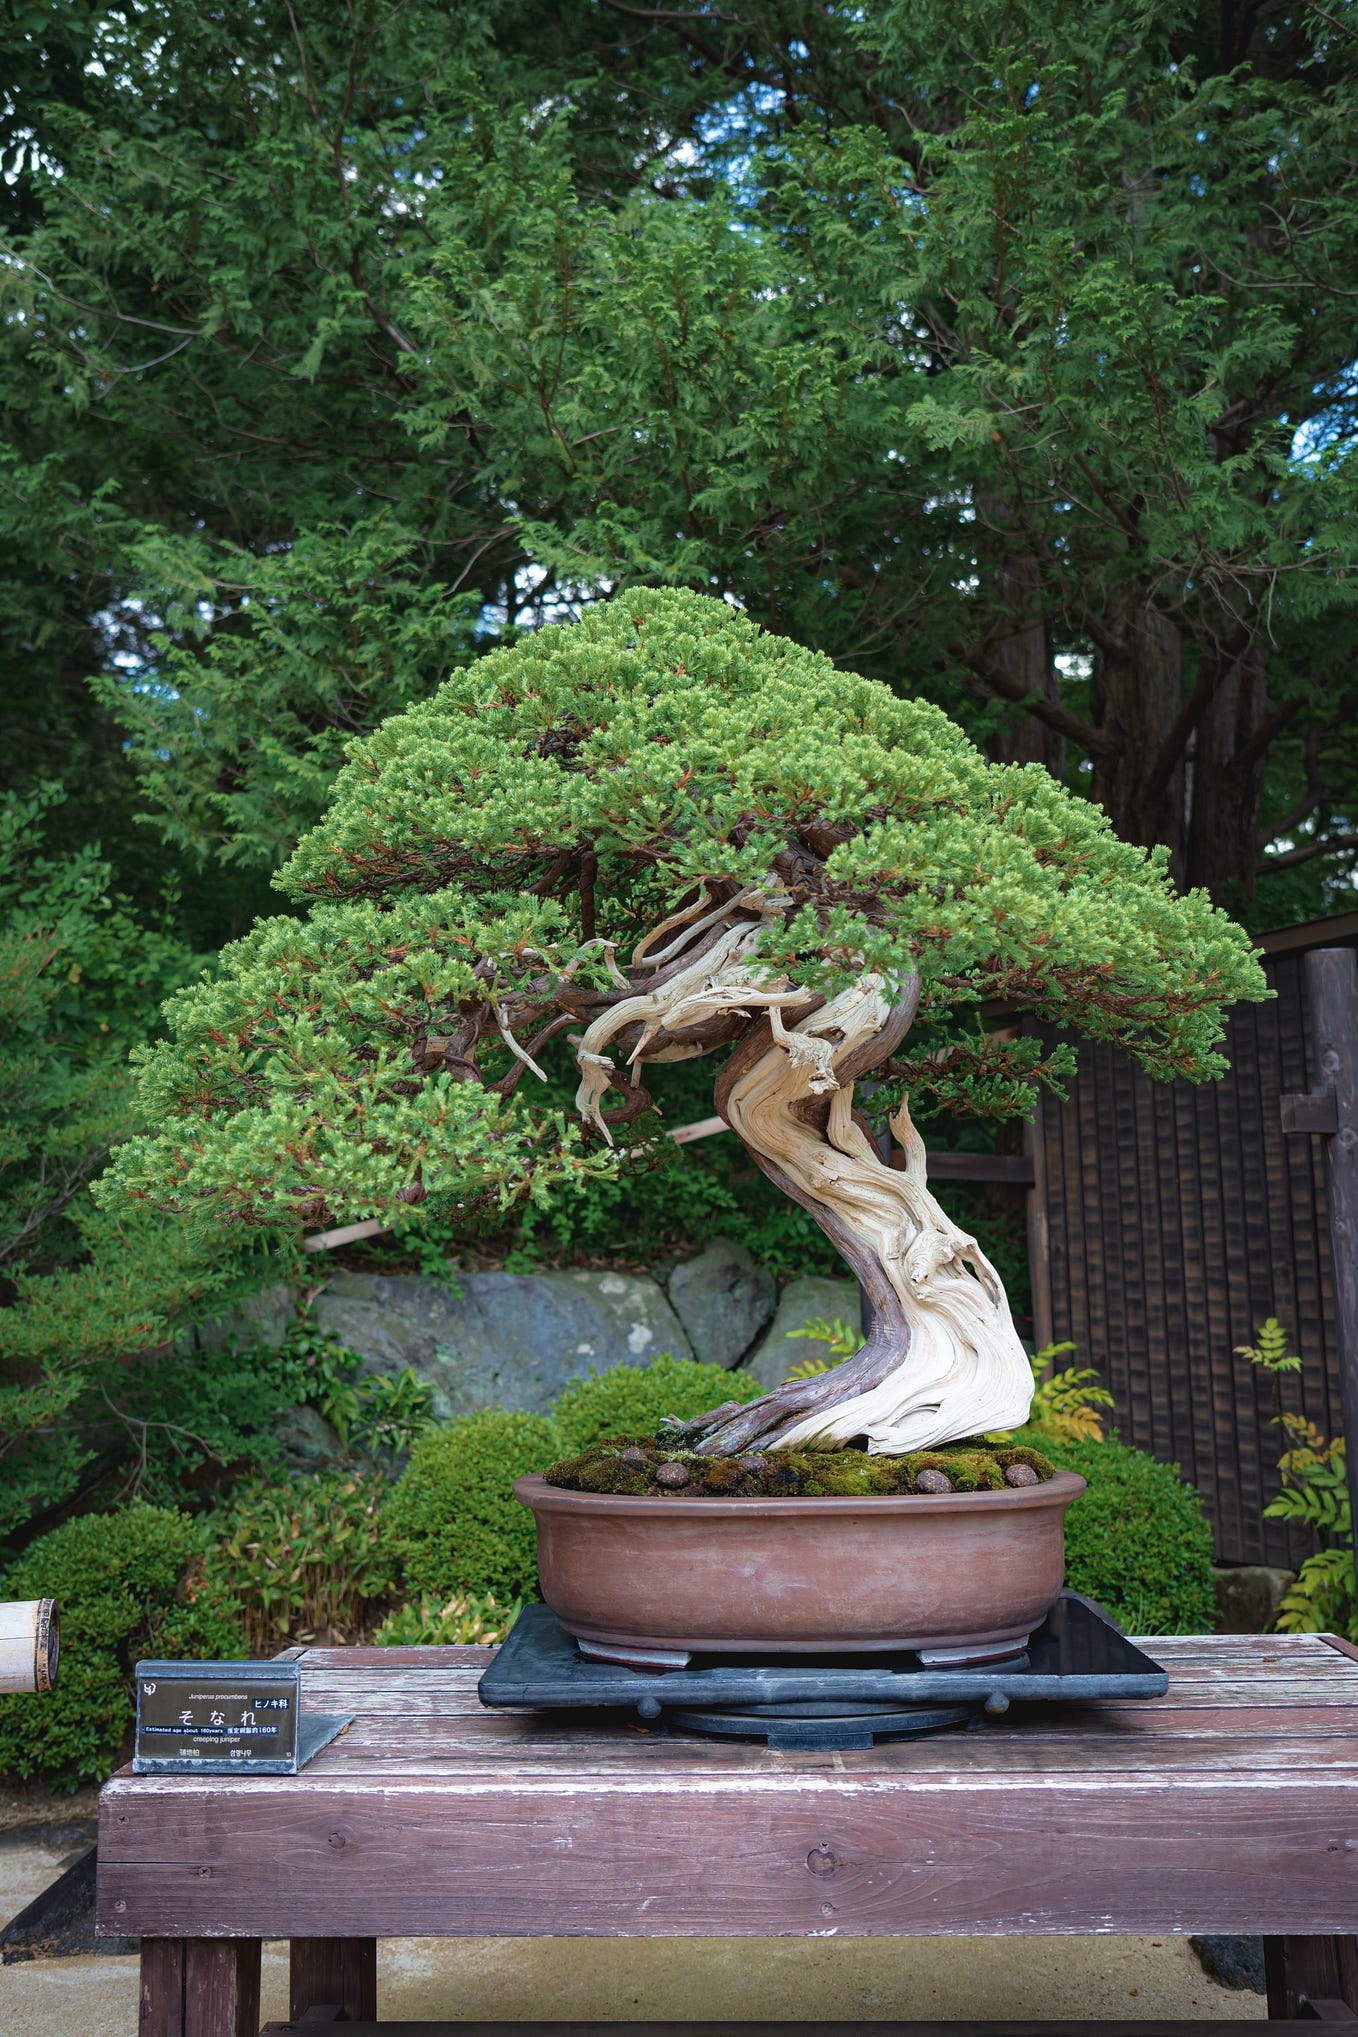 Bonsai - Medium Rock Juniper Bonsai Tree from  The old age  of the Bonsai tree strengthens the trees ability to withstand extremely  hardy and can withstand cold weather, but provide protection